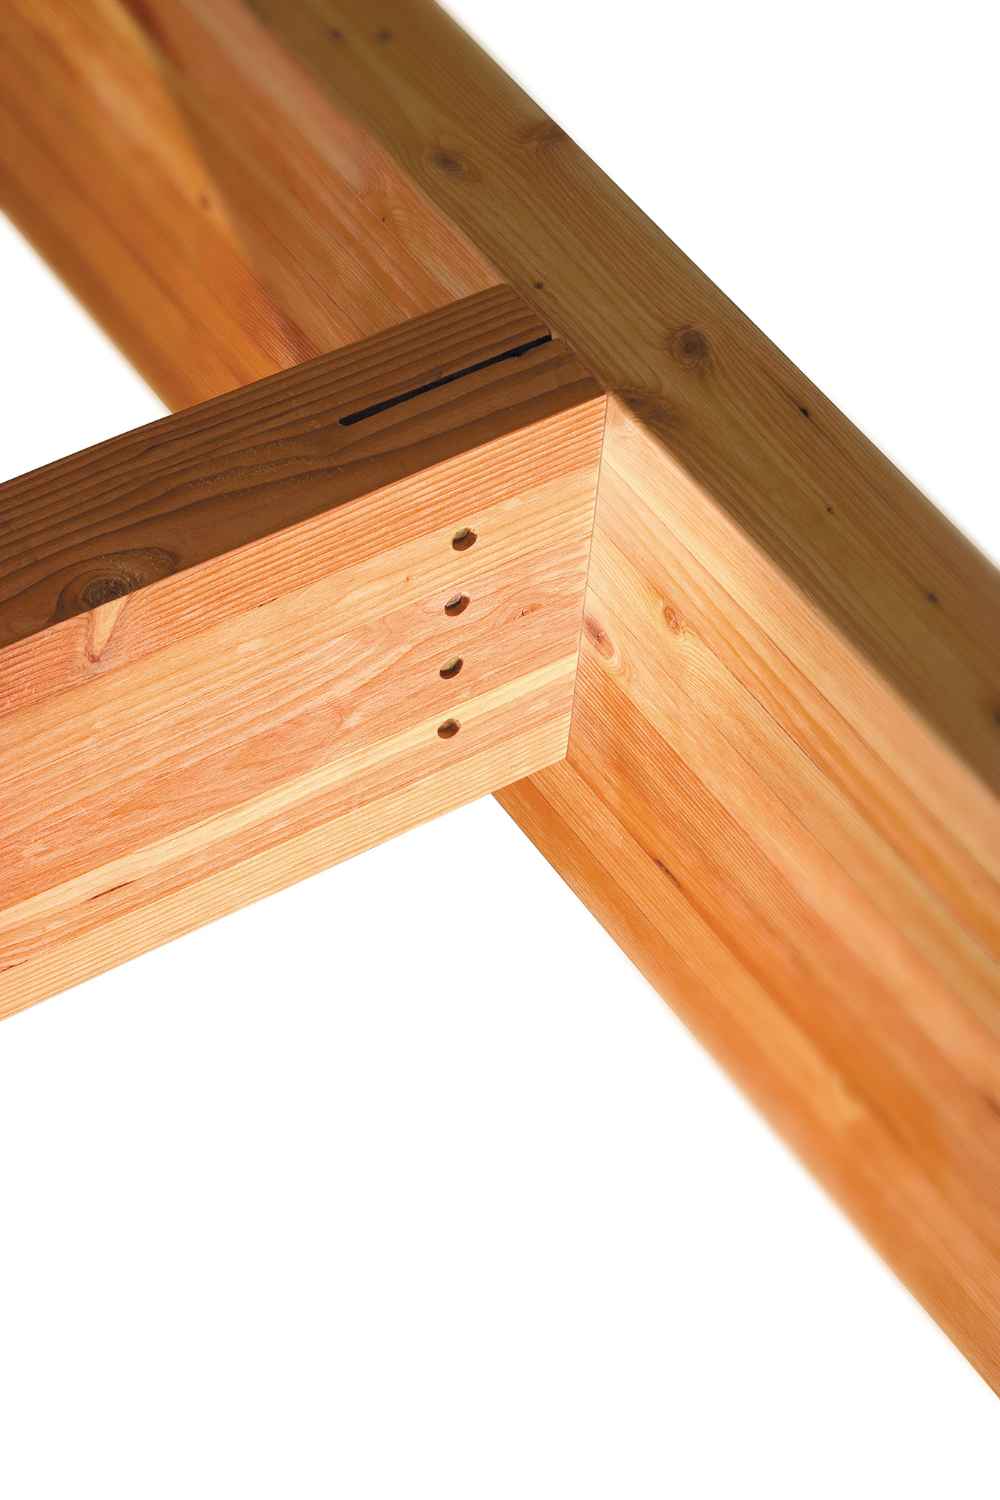 Simpson CJT4ZL Concealed Joist Tie w Long Pins ZMAX Finish image 4 of 5